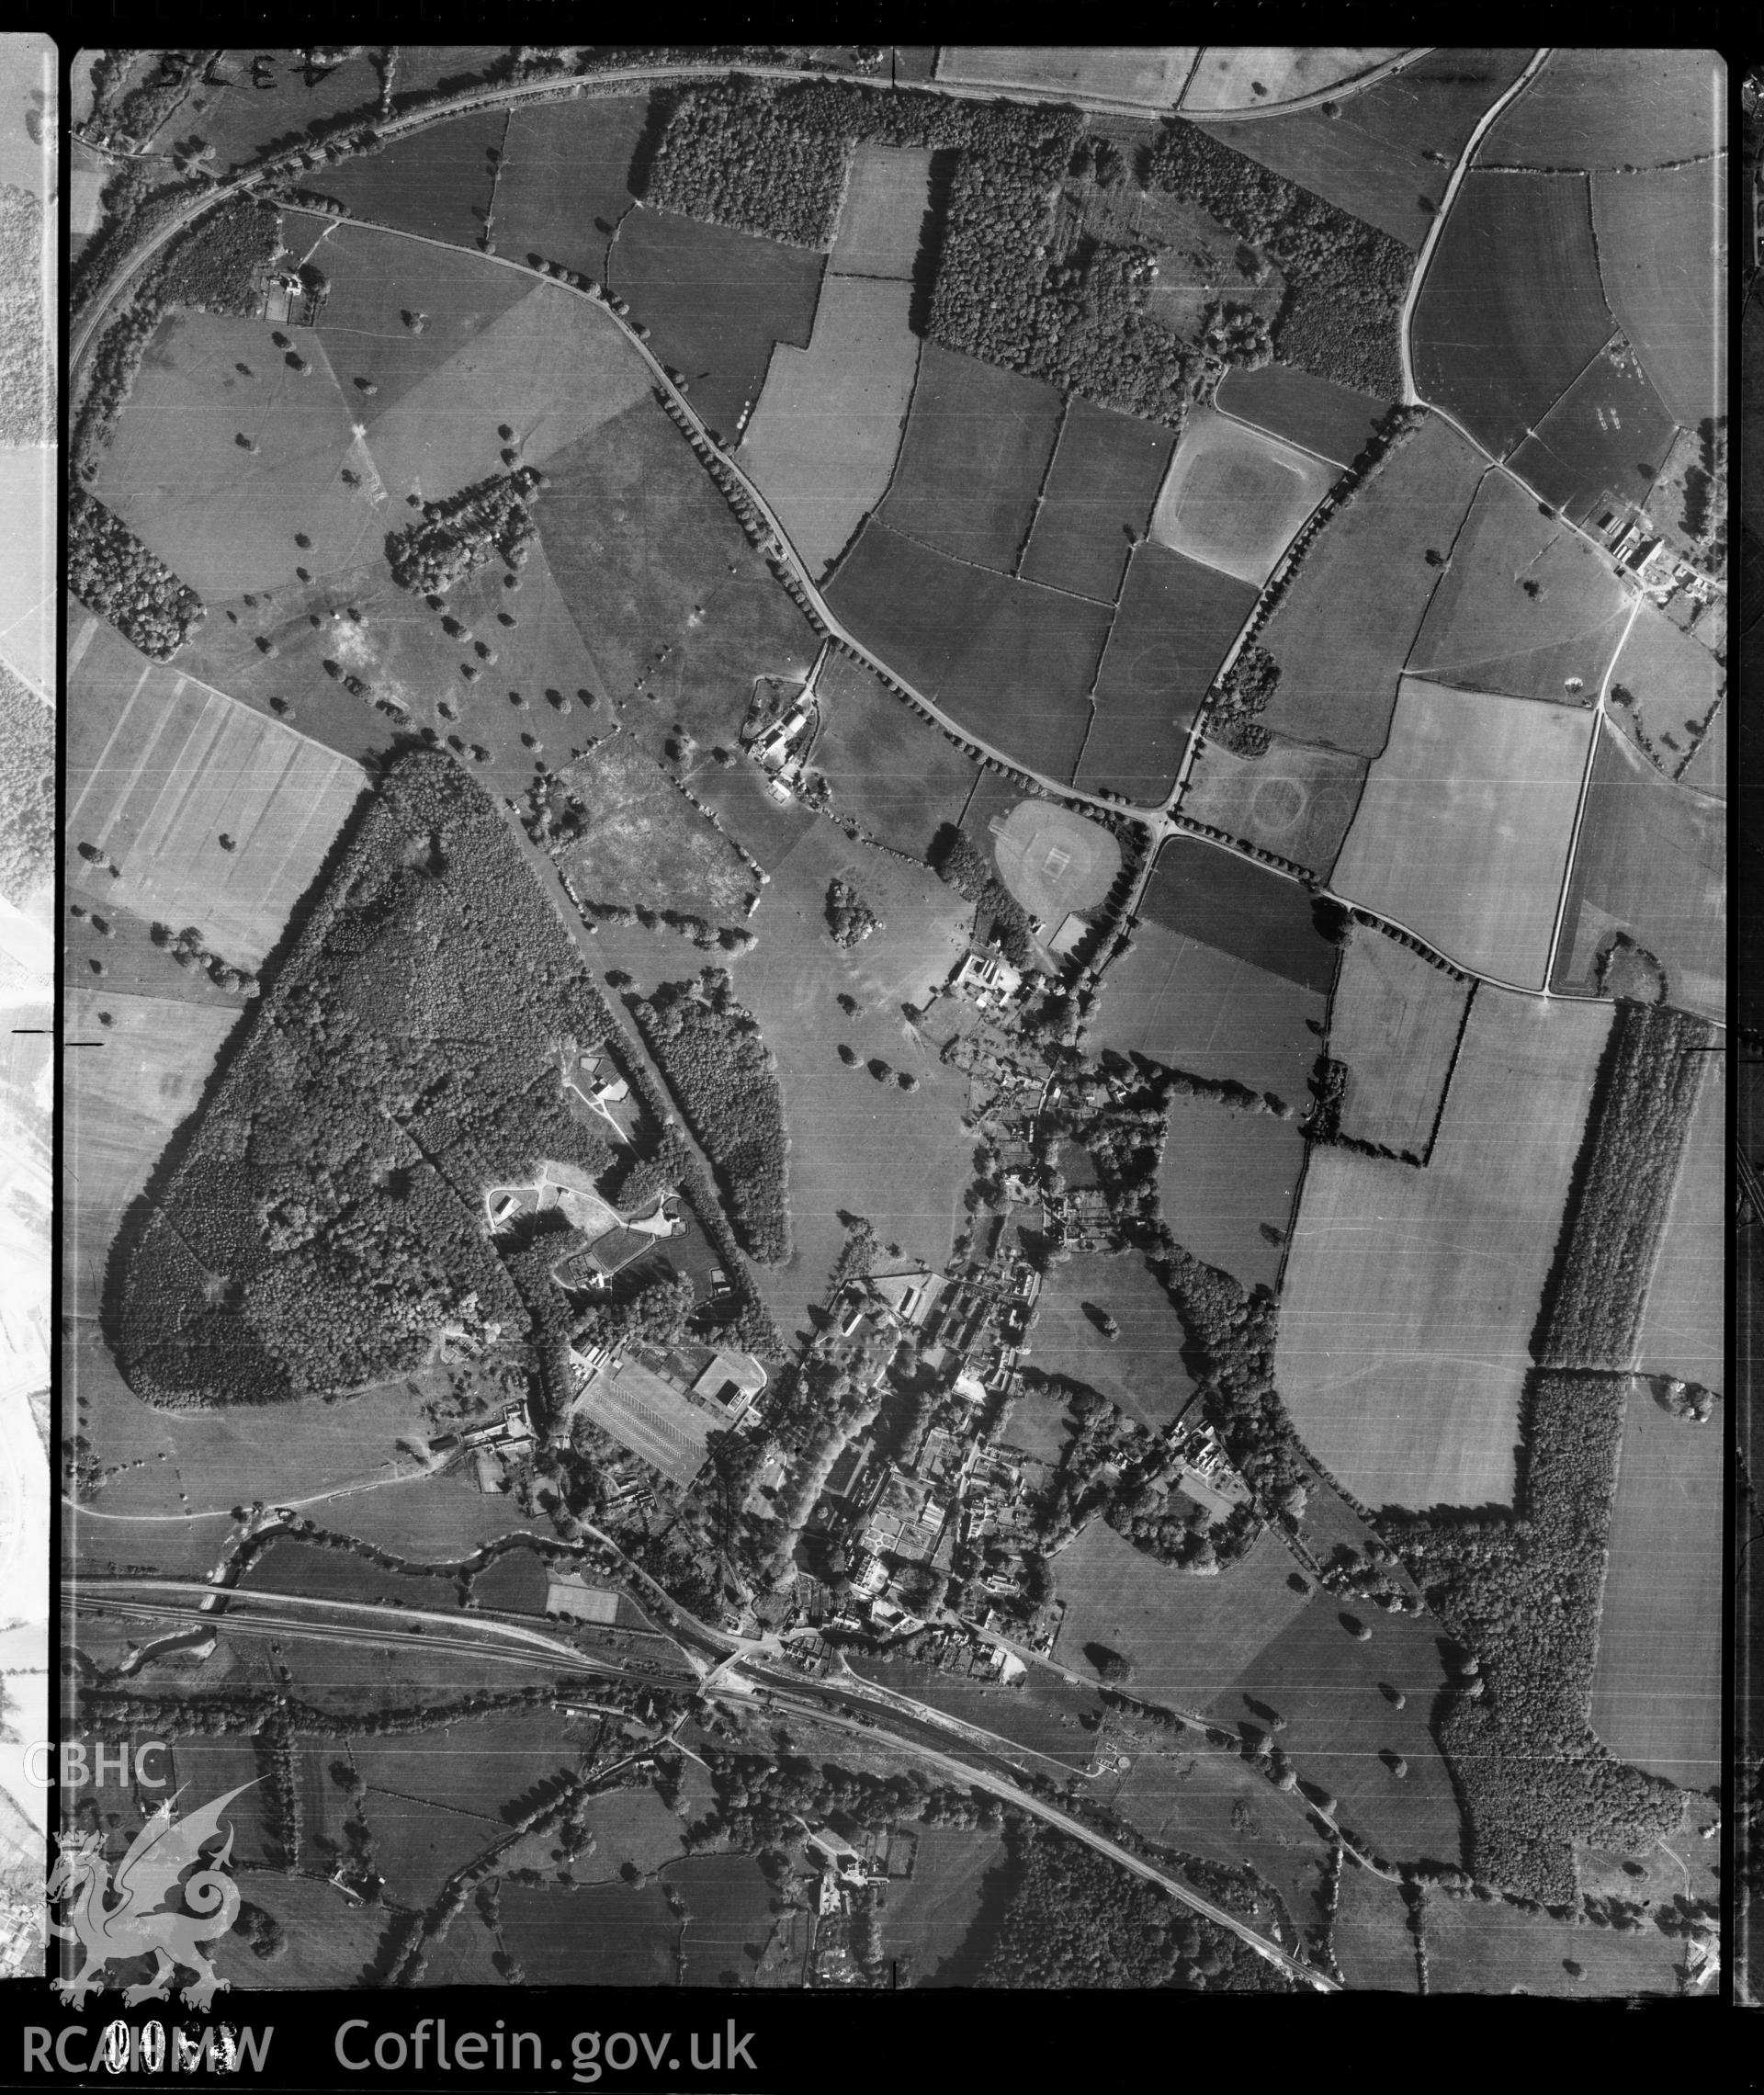 Digital copy of a Royal Air Force aerial view of the area around St Fagans, dated 1958.